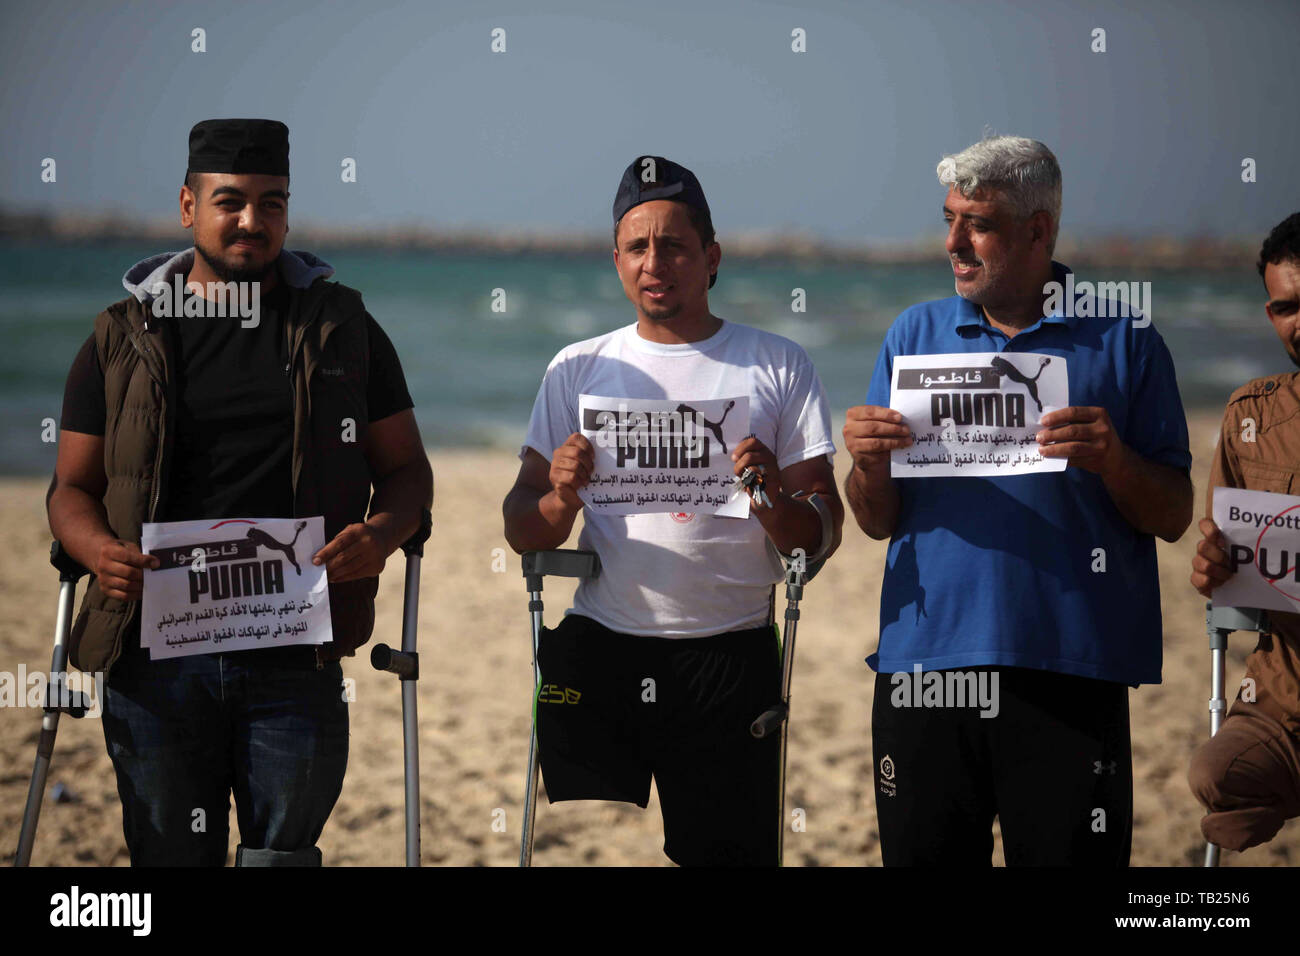 May 29, 2019 - Gaza City, Gaza Strip, Palestinian Territory - Wounded Palestinians, who were lose their legs during the clashes with Israeli troops, hold placards during a protest calling to boycott Puma sport company, on the beach of Gaza city on May 29, 2019. Puma is the main sponsor of the Israel Football Association (IFA), which includes teams in Israelâ€™s illegal settlements on occupied Palestinian  (Credit Image: © Mahmoud Ajjour/APA Images via ZUMA Wire) Stock Photo